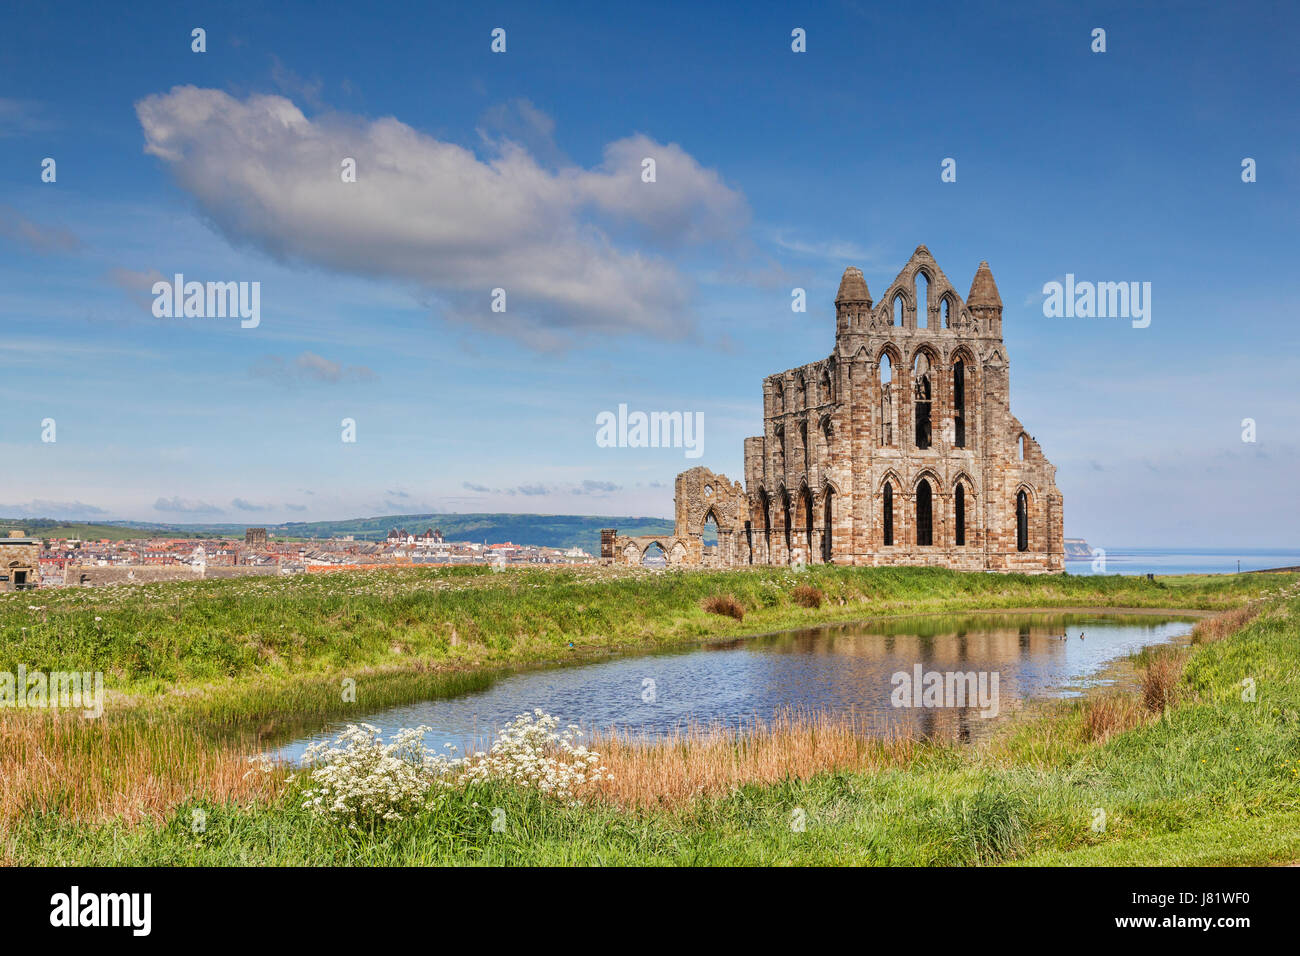 Whitby Abbey, North Yorkshire, England, UK. Photo taken from outside the grounds. Stock Photo